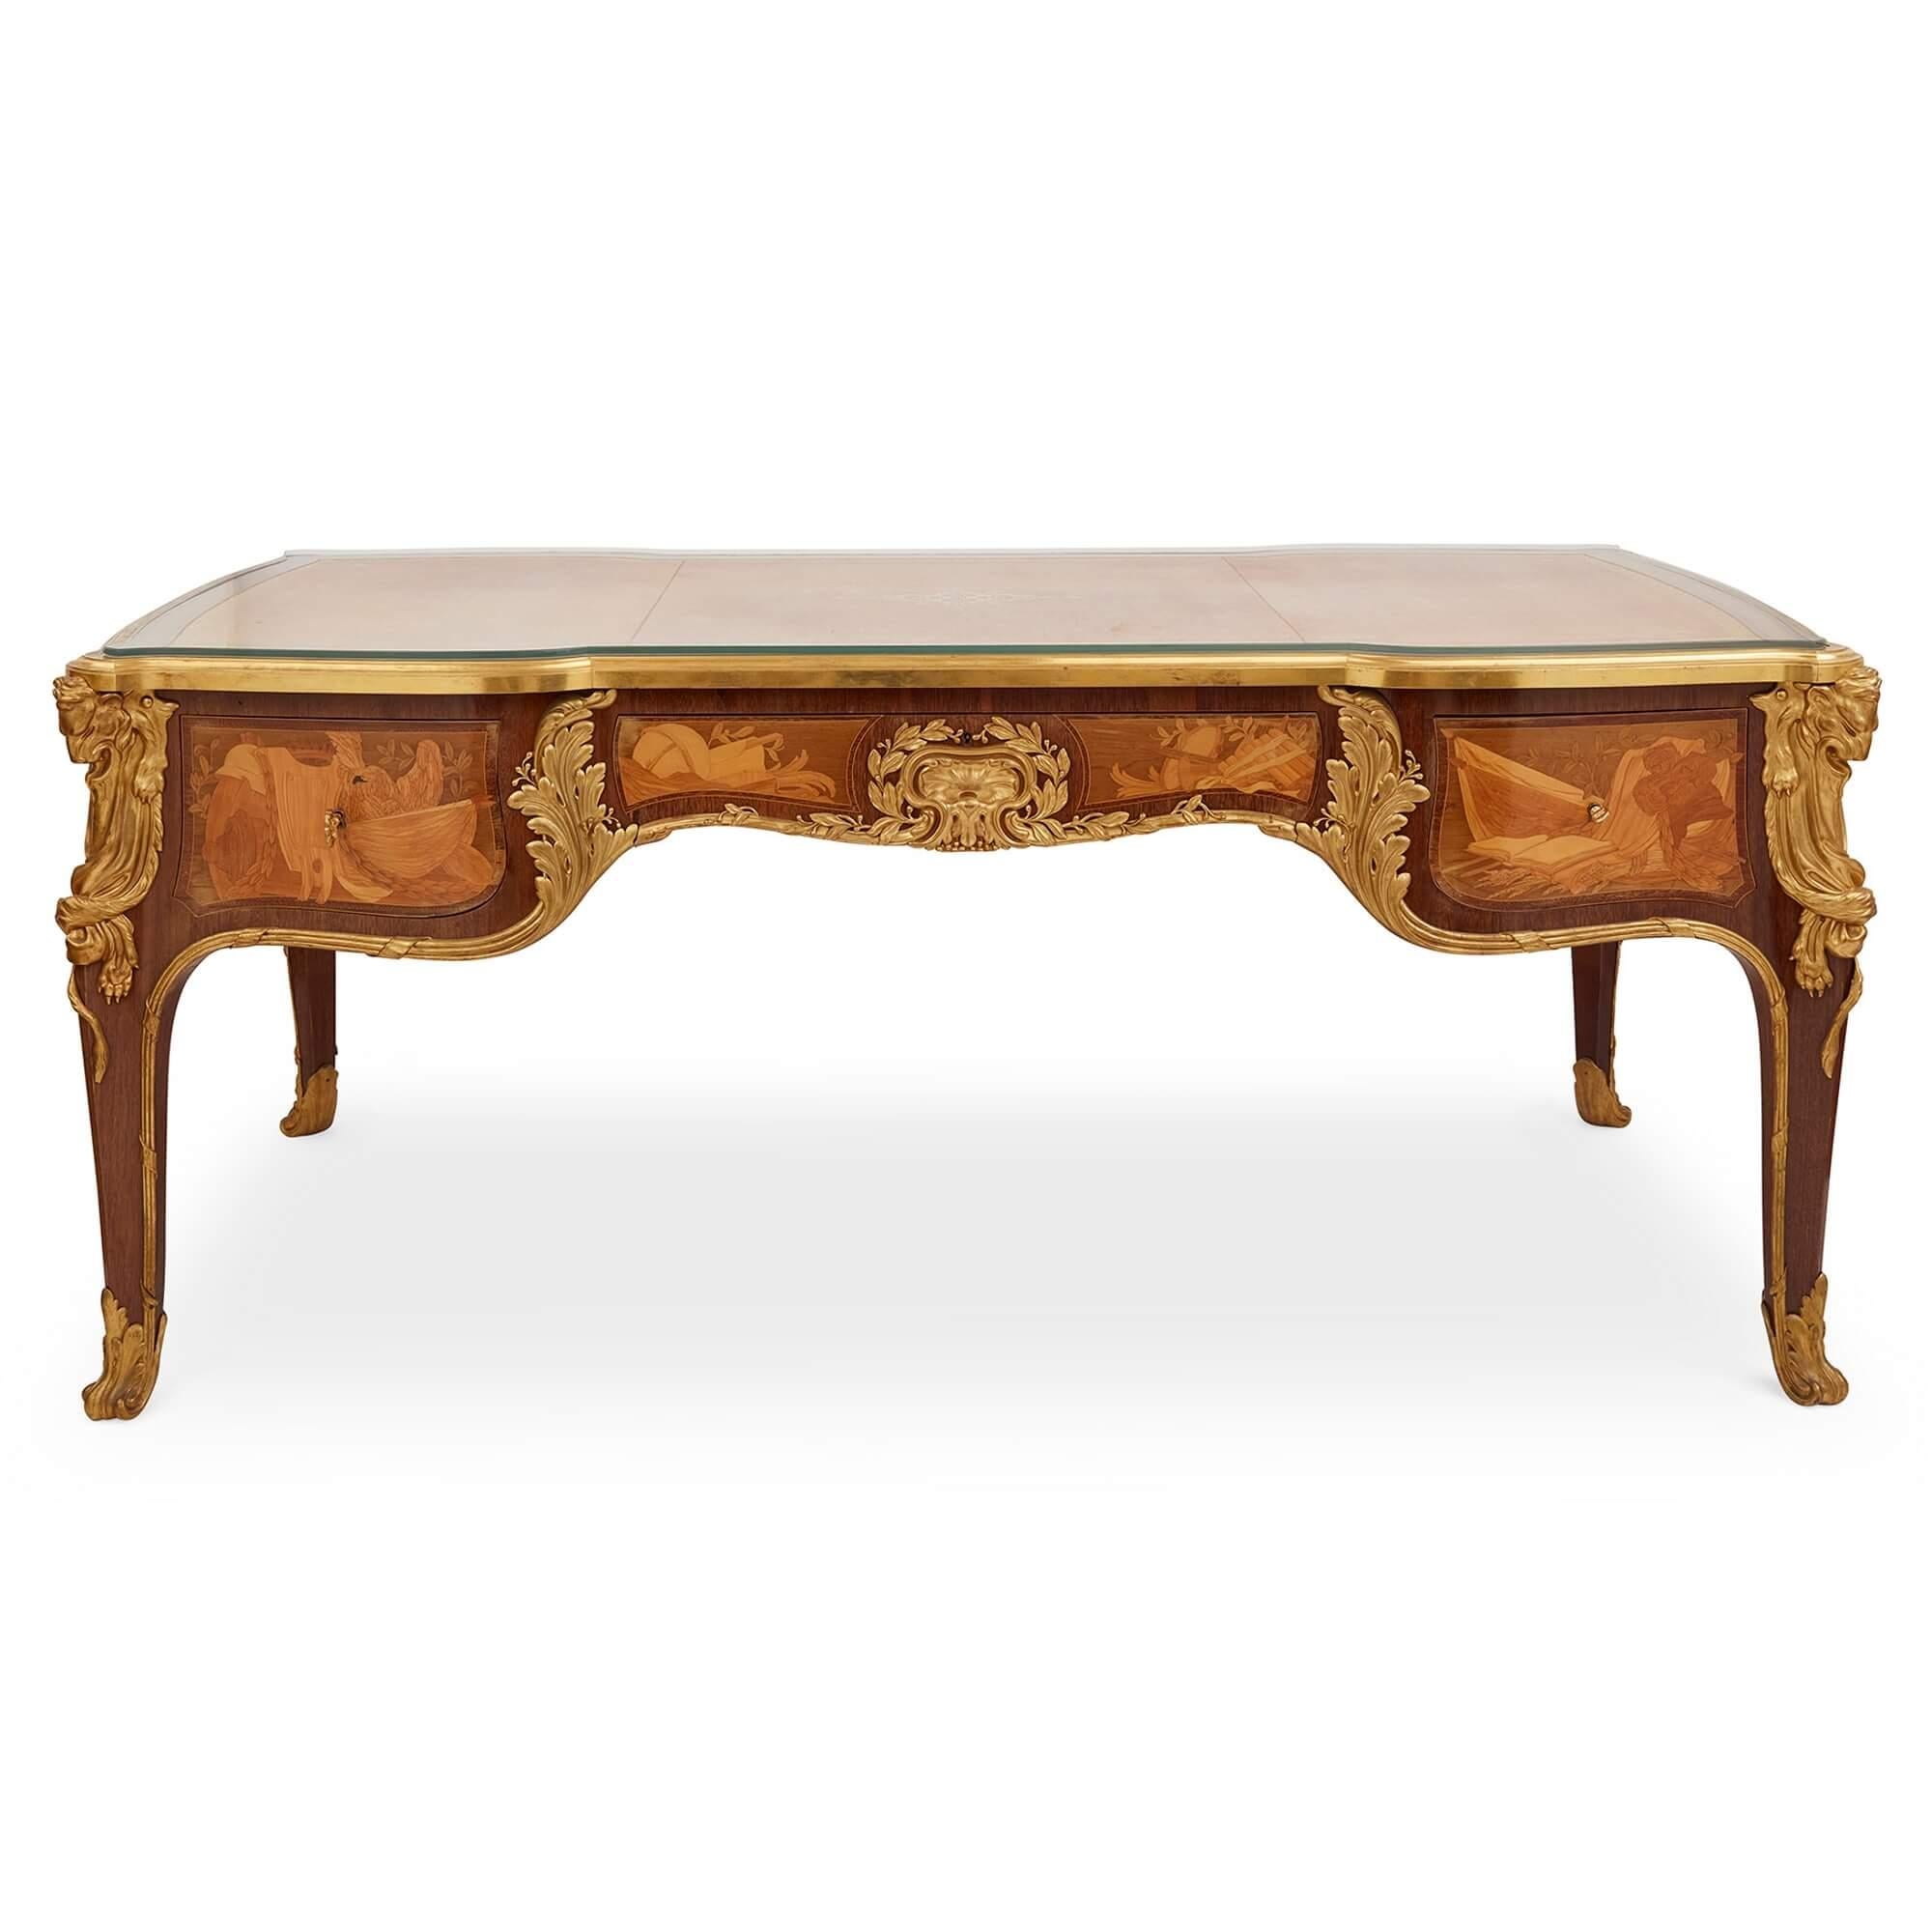 Antique French Louis XV style ormolu mounted marquetry desk by Maison Léger
French, c. 1880
Height 80cm, width 185cm, depth 98cm

This very impressive desk was crafted around 1880 by Maison Léger who was an award-winning French firm of